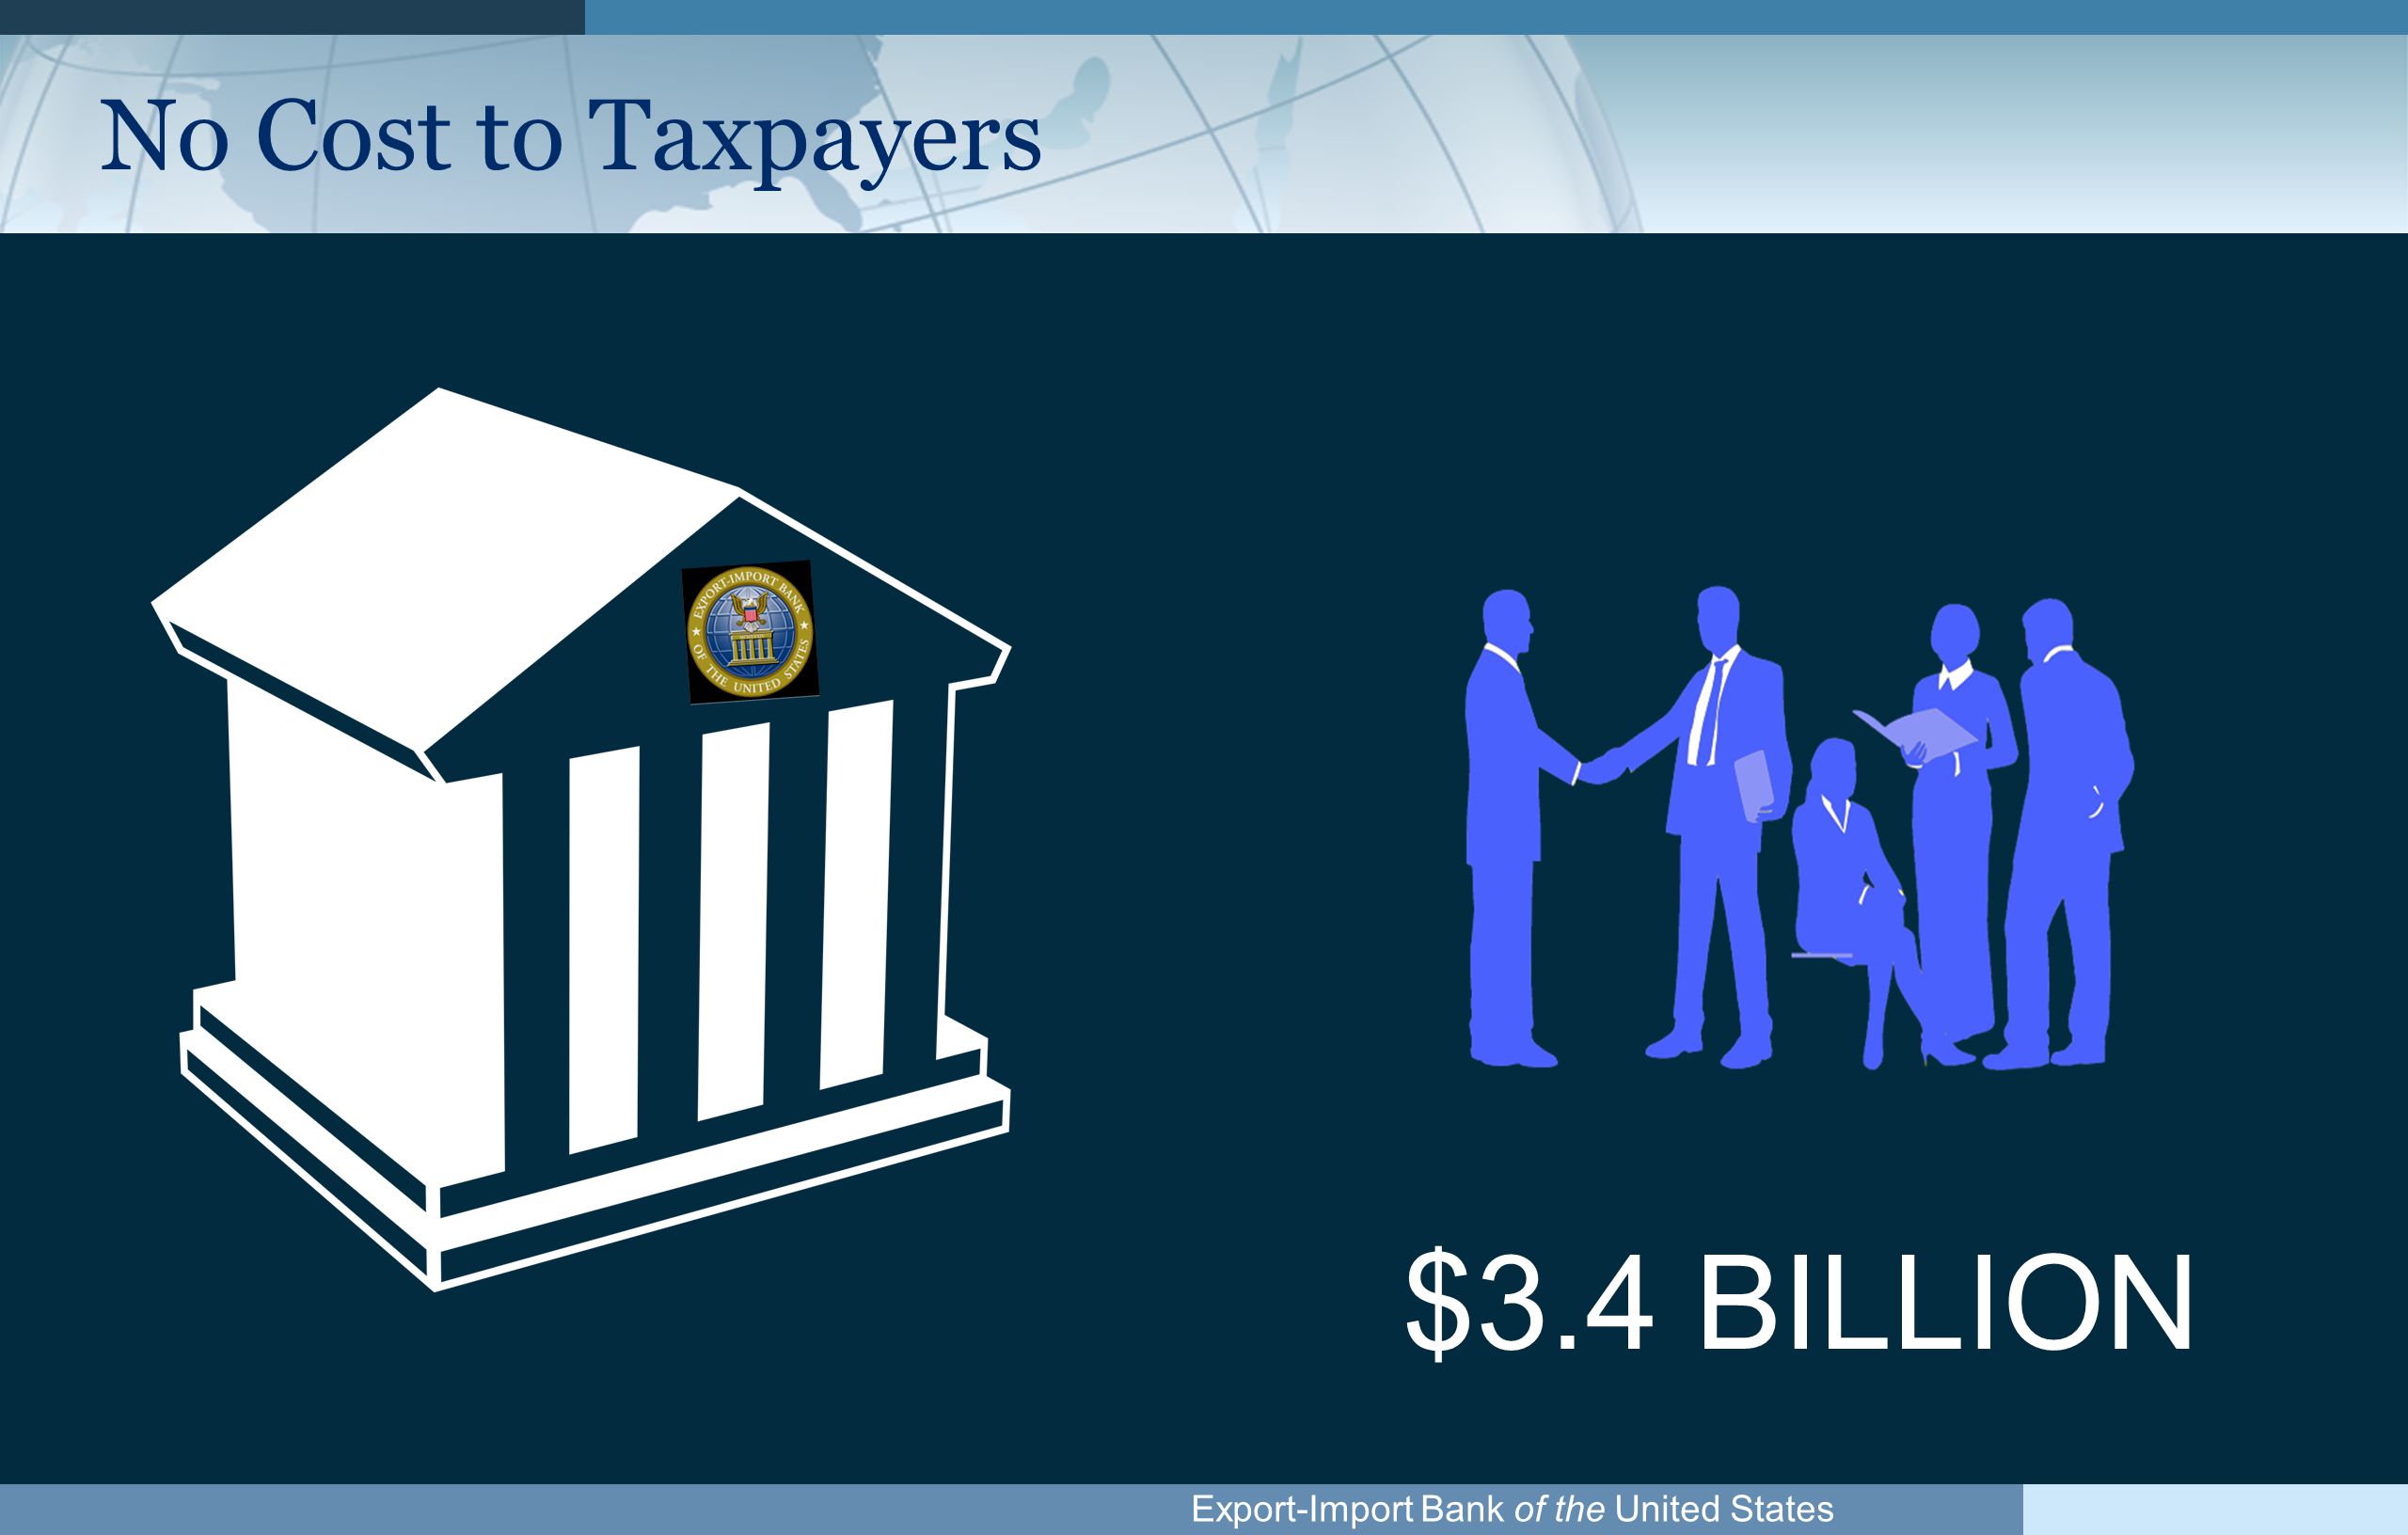 Export-Import Bank of the United States $3.4 BILLION No Cost to Taxpayers